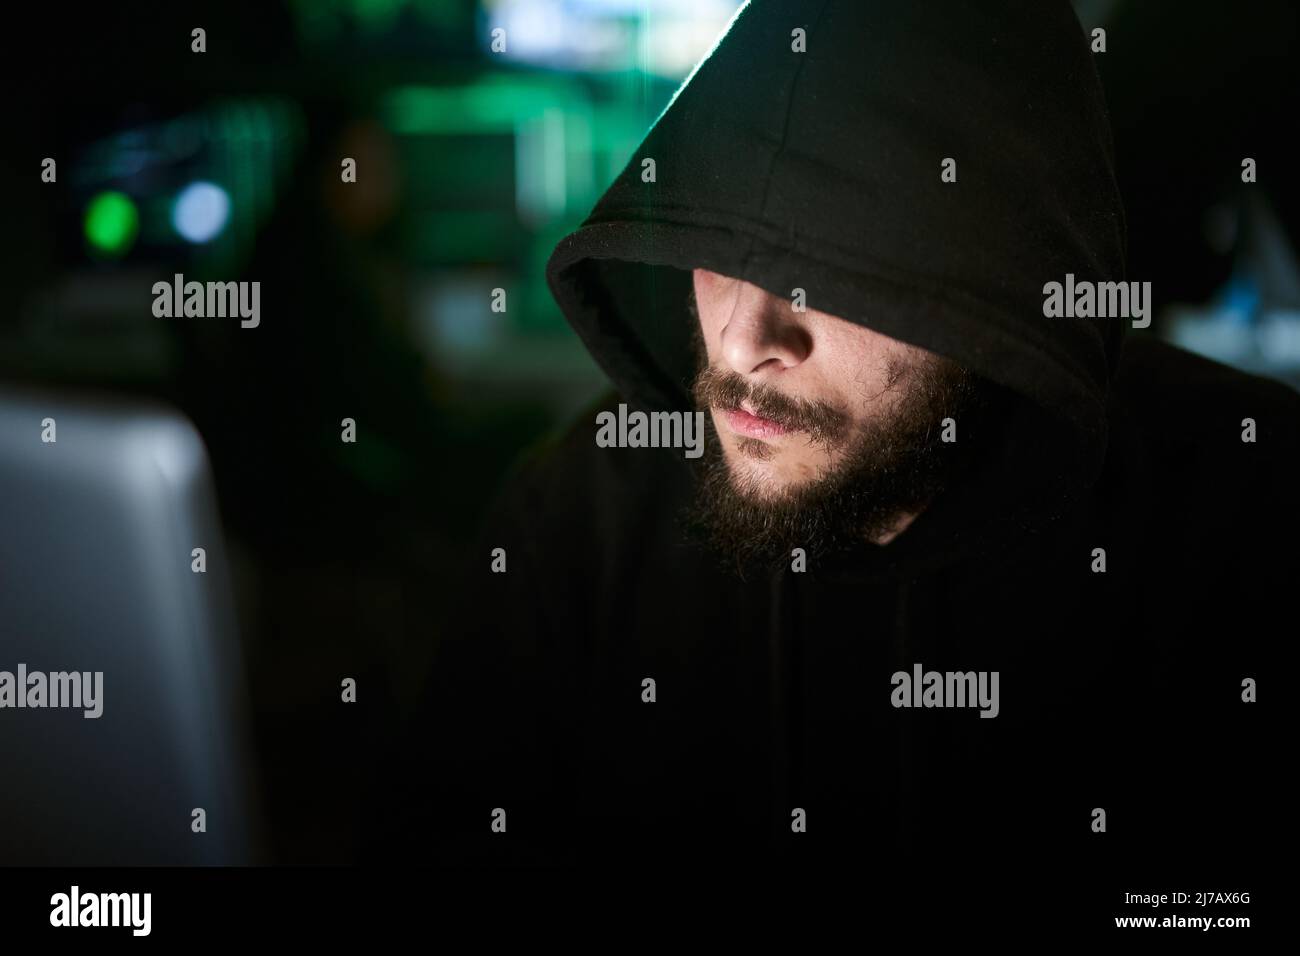 Criminal team Hacker using computer for organizing massive data breach attack on government and big company servers. Dark room surrounded computers Stock Photo